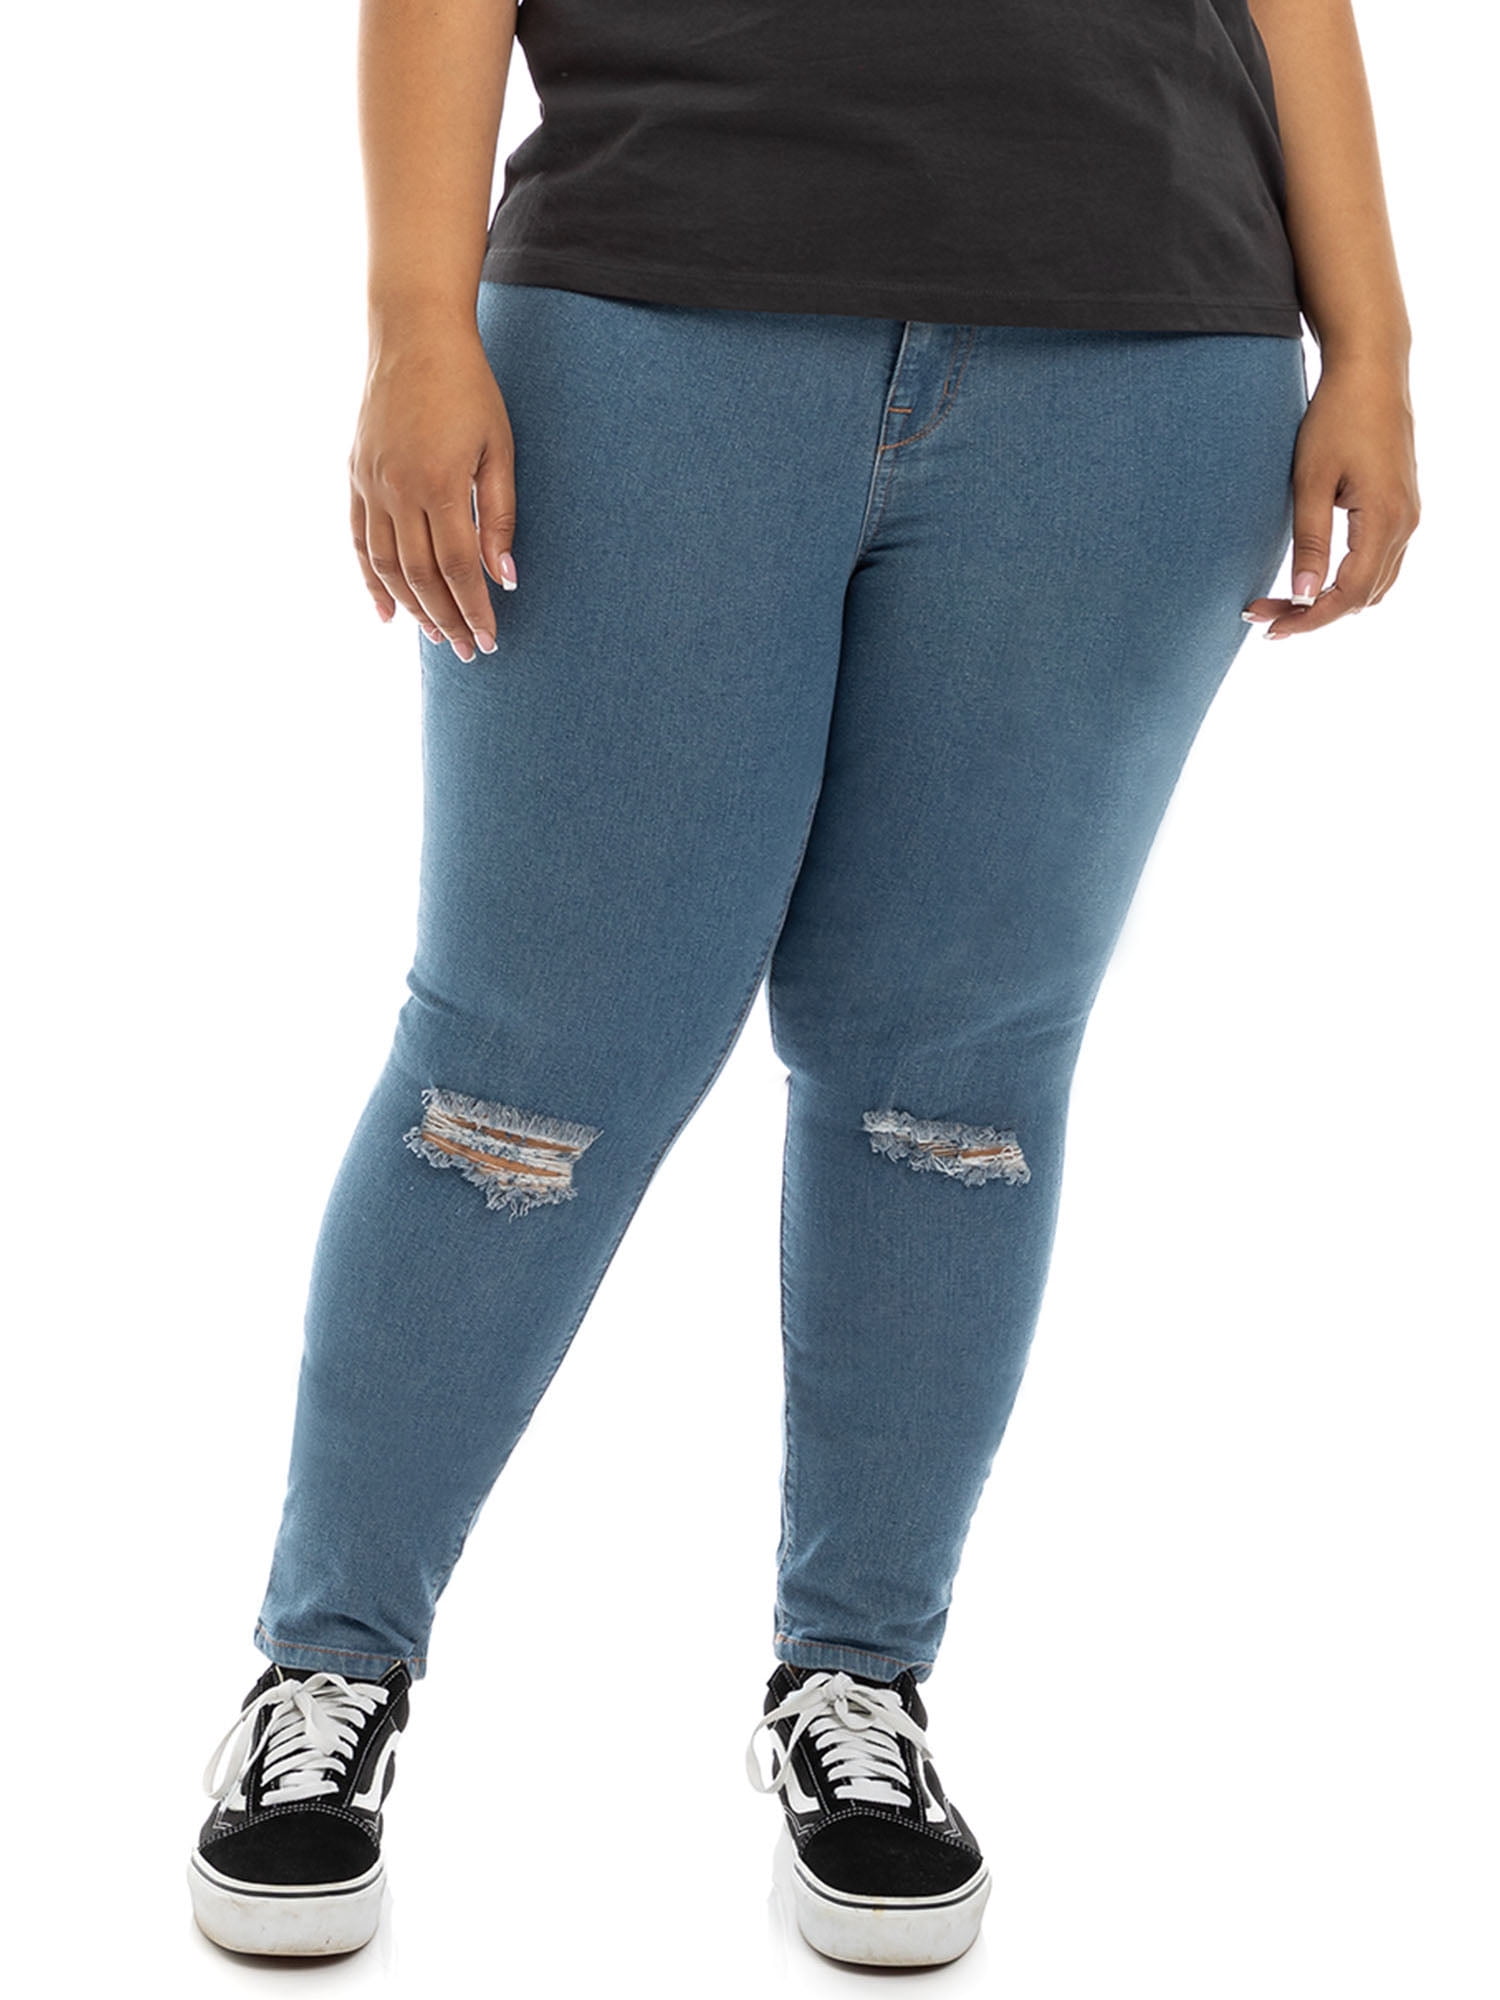 A3 Denim Women's Plus Size Ankle Slimming Jean with Double Button Waistband  